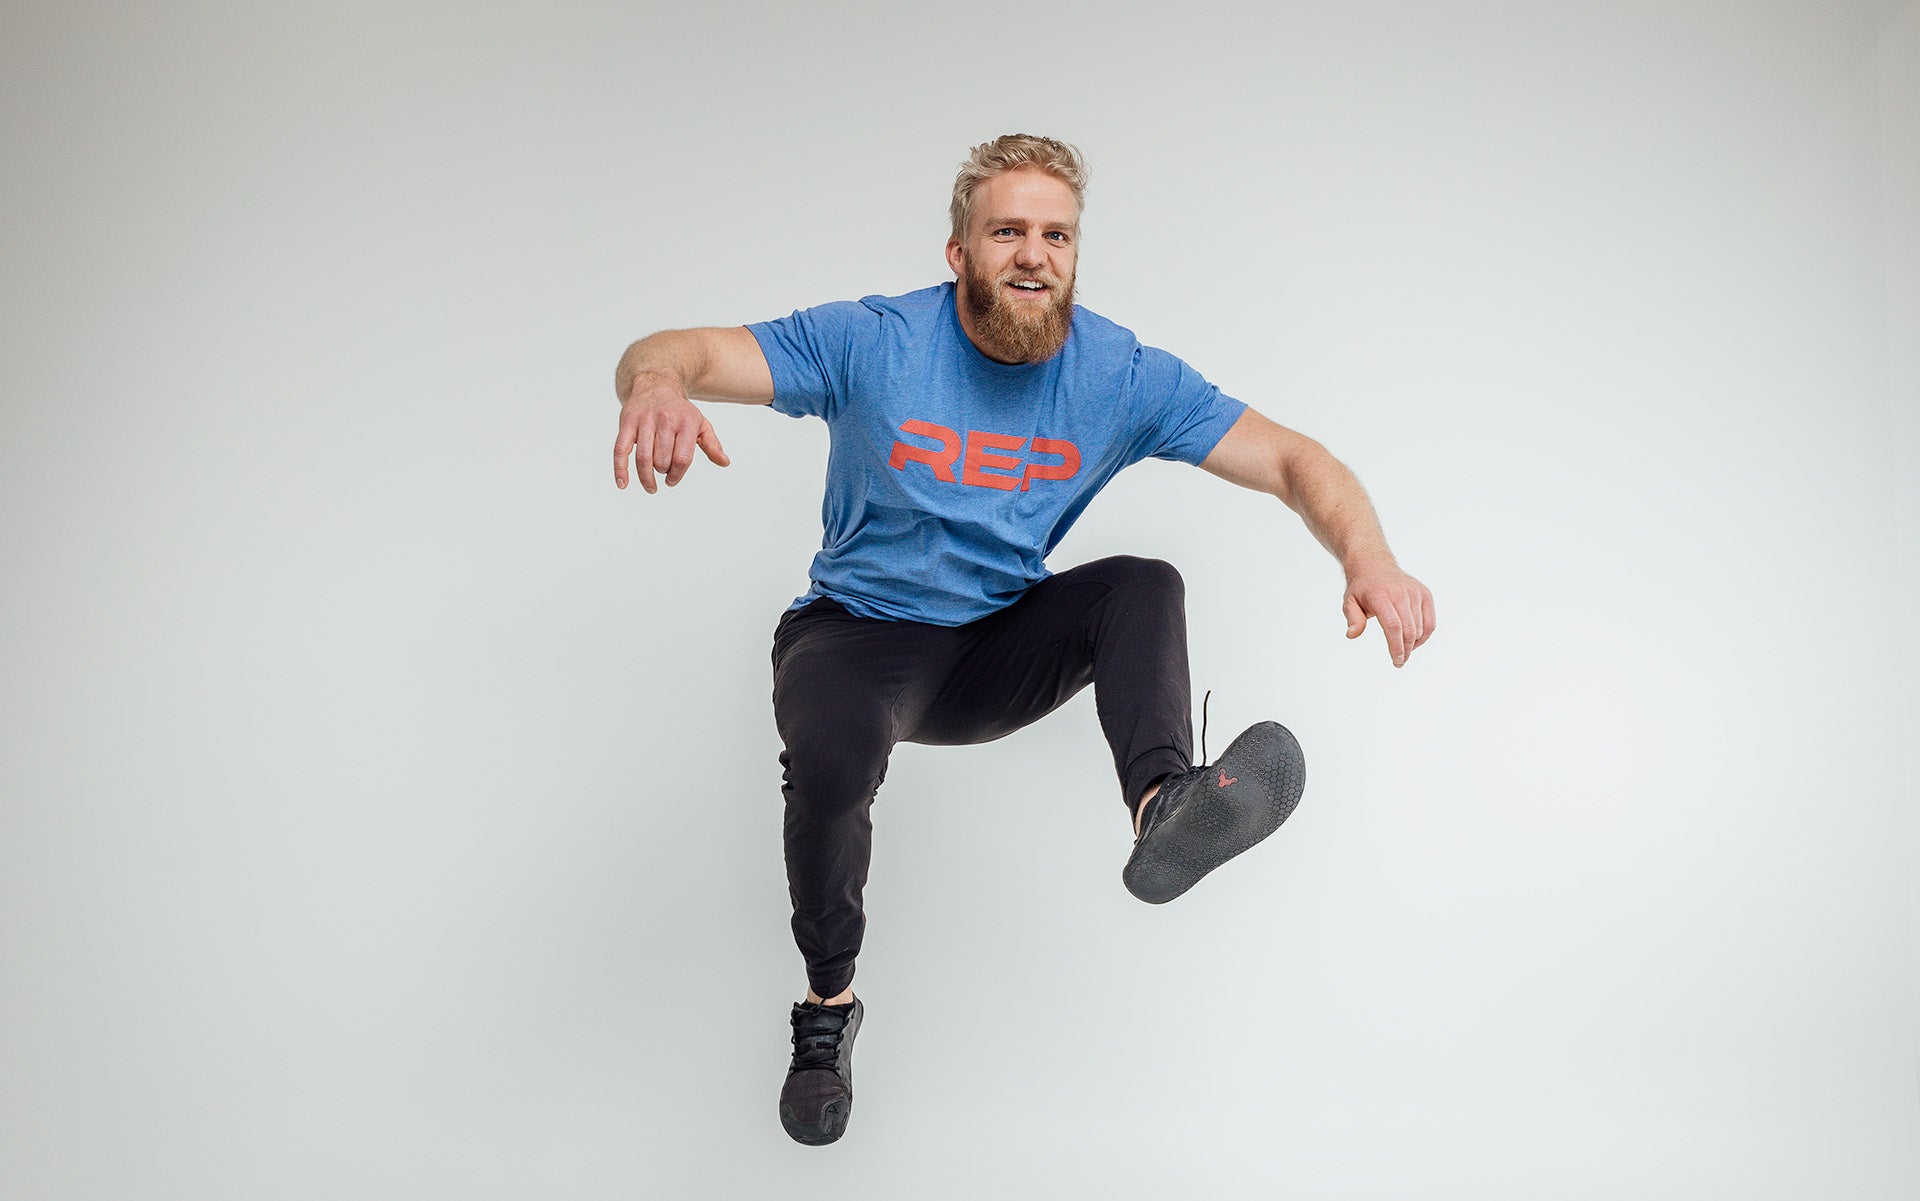 Guy jumping in blue daily driver shirt